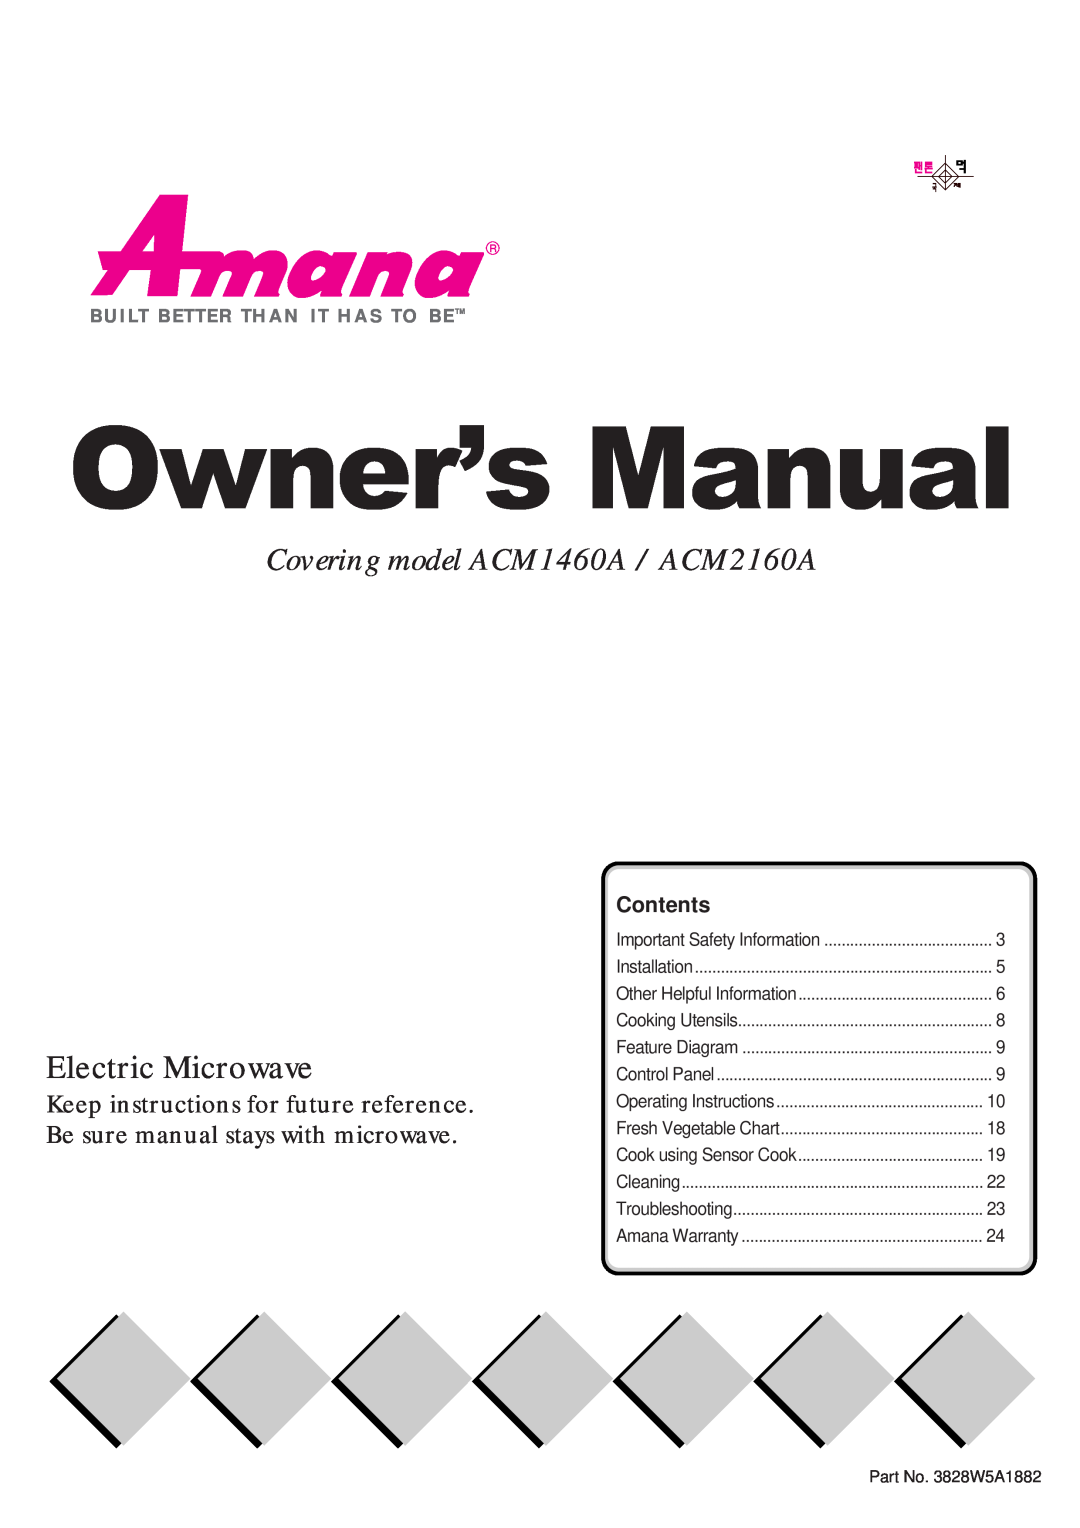 Amana operating instructions Covering model ACM1460A / ACM2160A, Electric Microwave, OwnerÕs Manual, Contents, Cleaning 